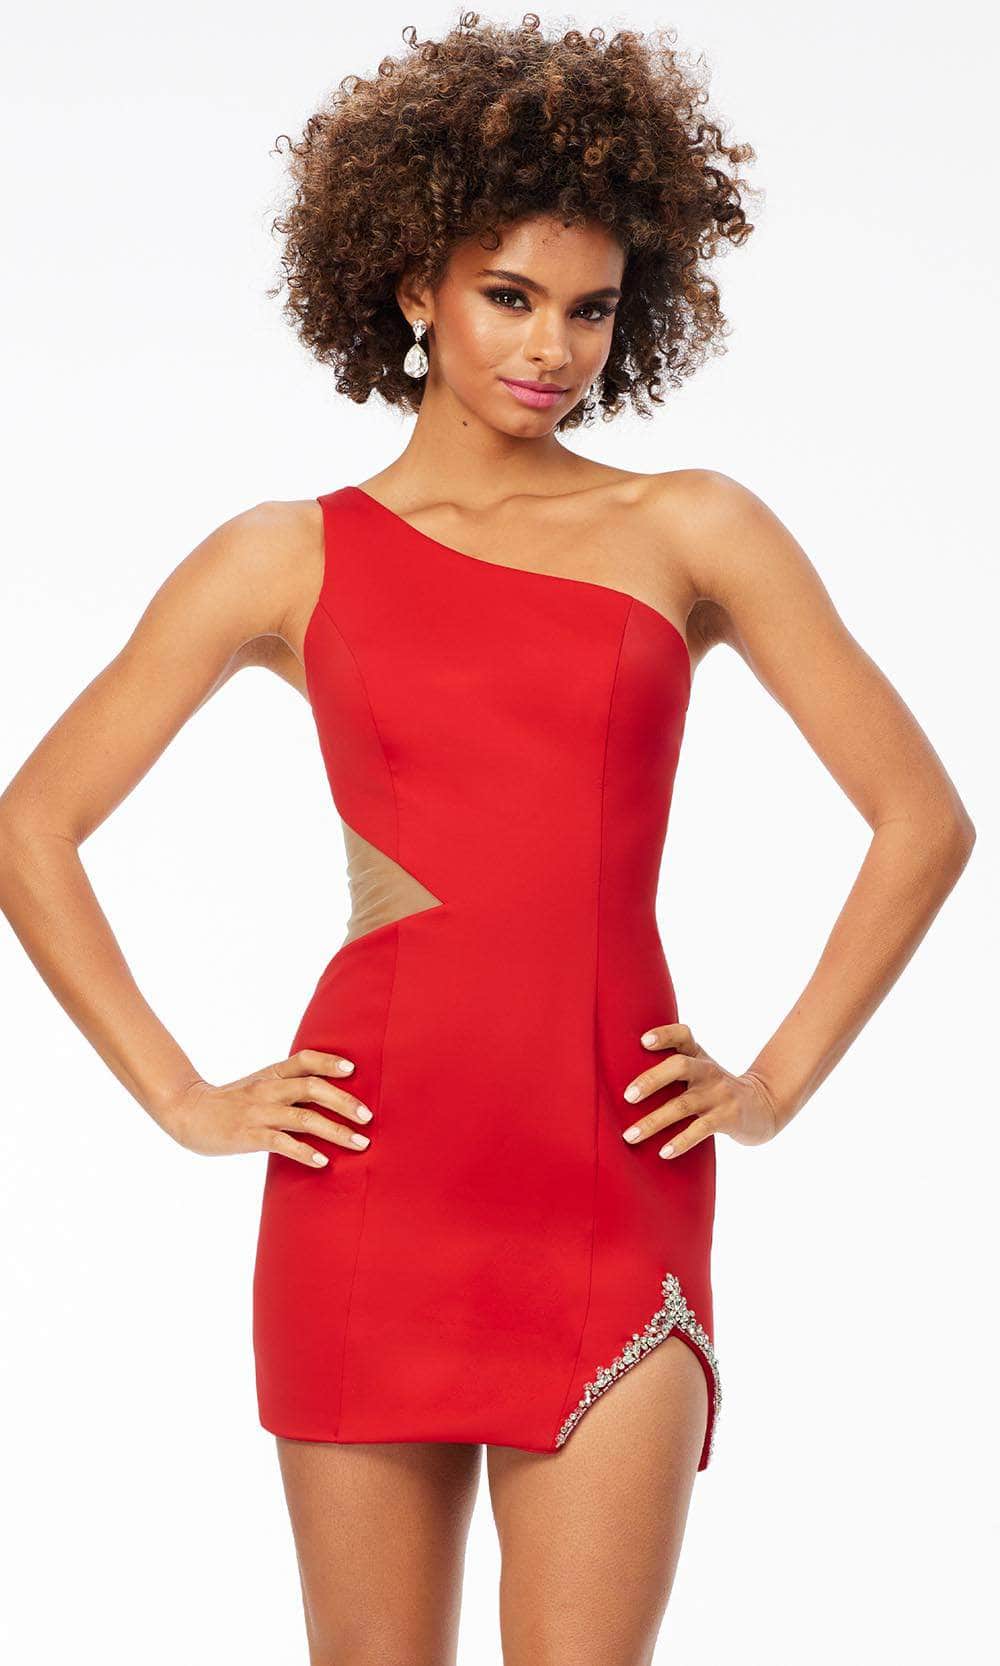 Ashley Lauren 4516 - One Shoulder Sheath Party Dress Special Occasion Dress 00 / Red